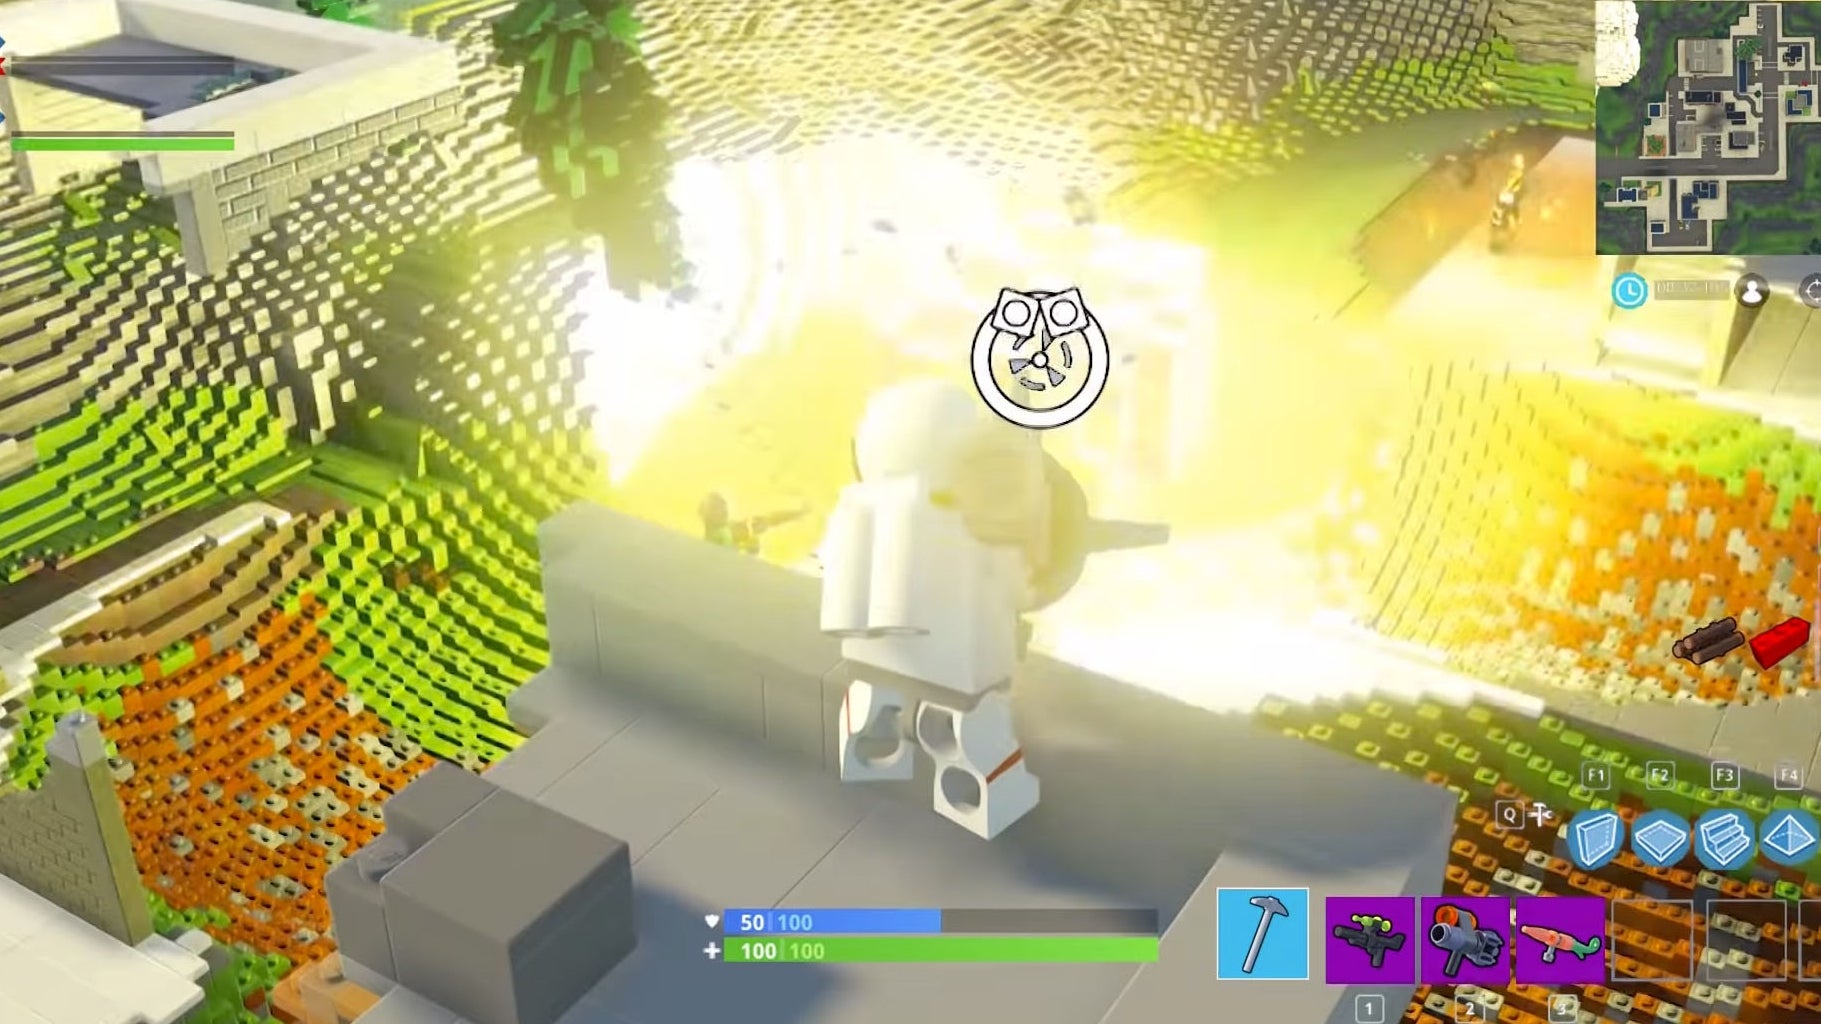 Lego Fortnite Battle Royale looks good enough to be real 